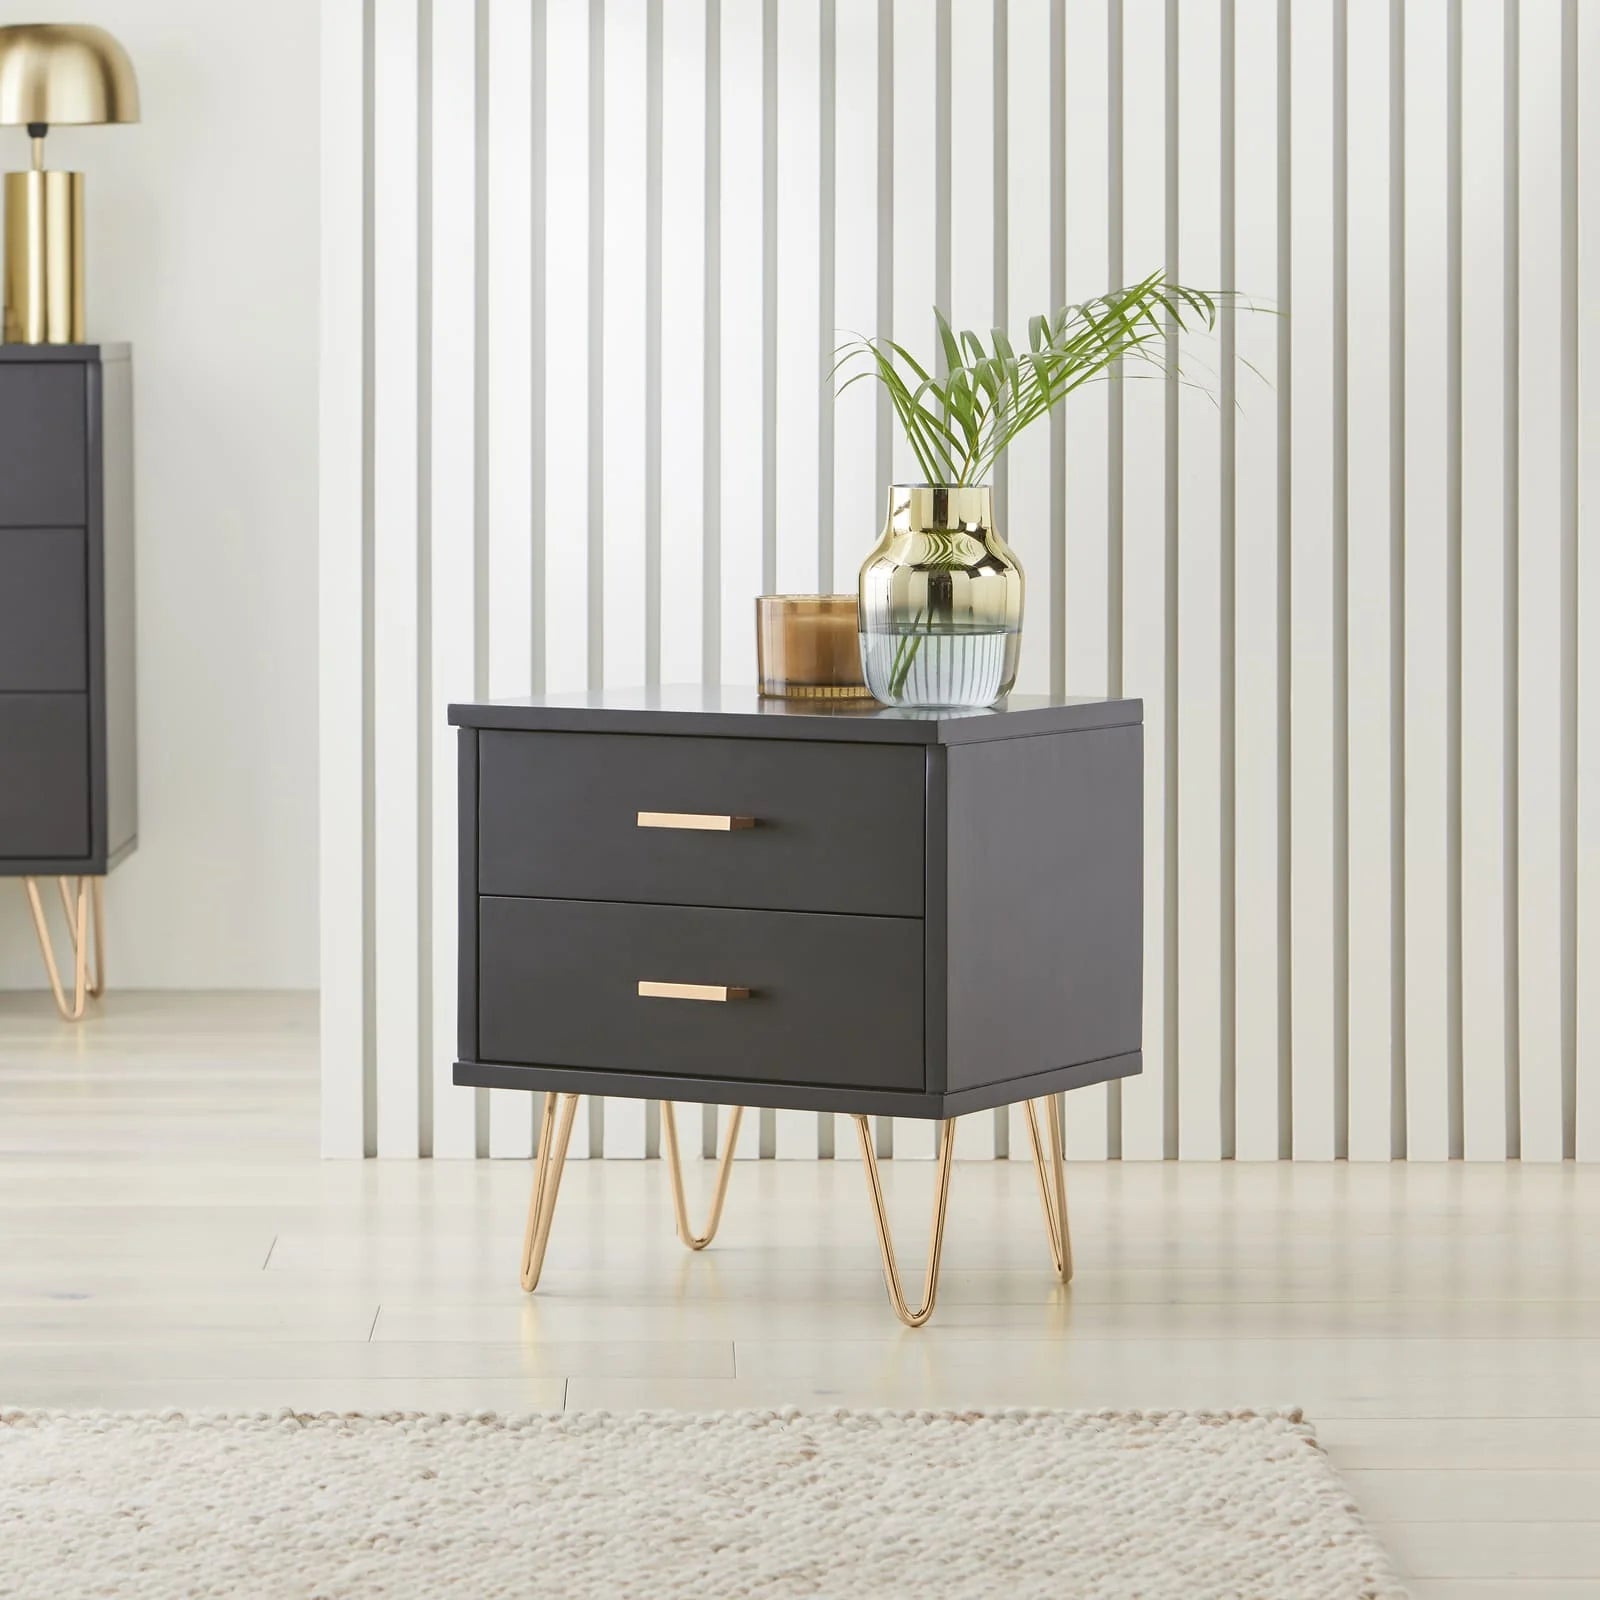 Monroe black painted solid wood bedside table with 2 drawers and metal hardware | malletandplane.com